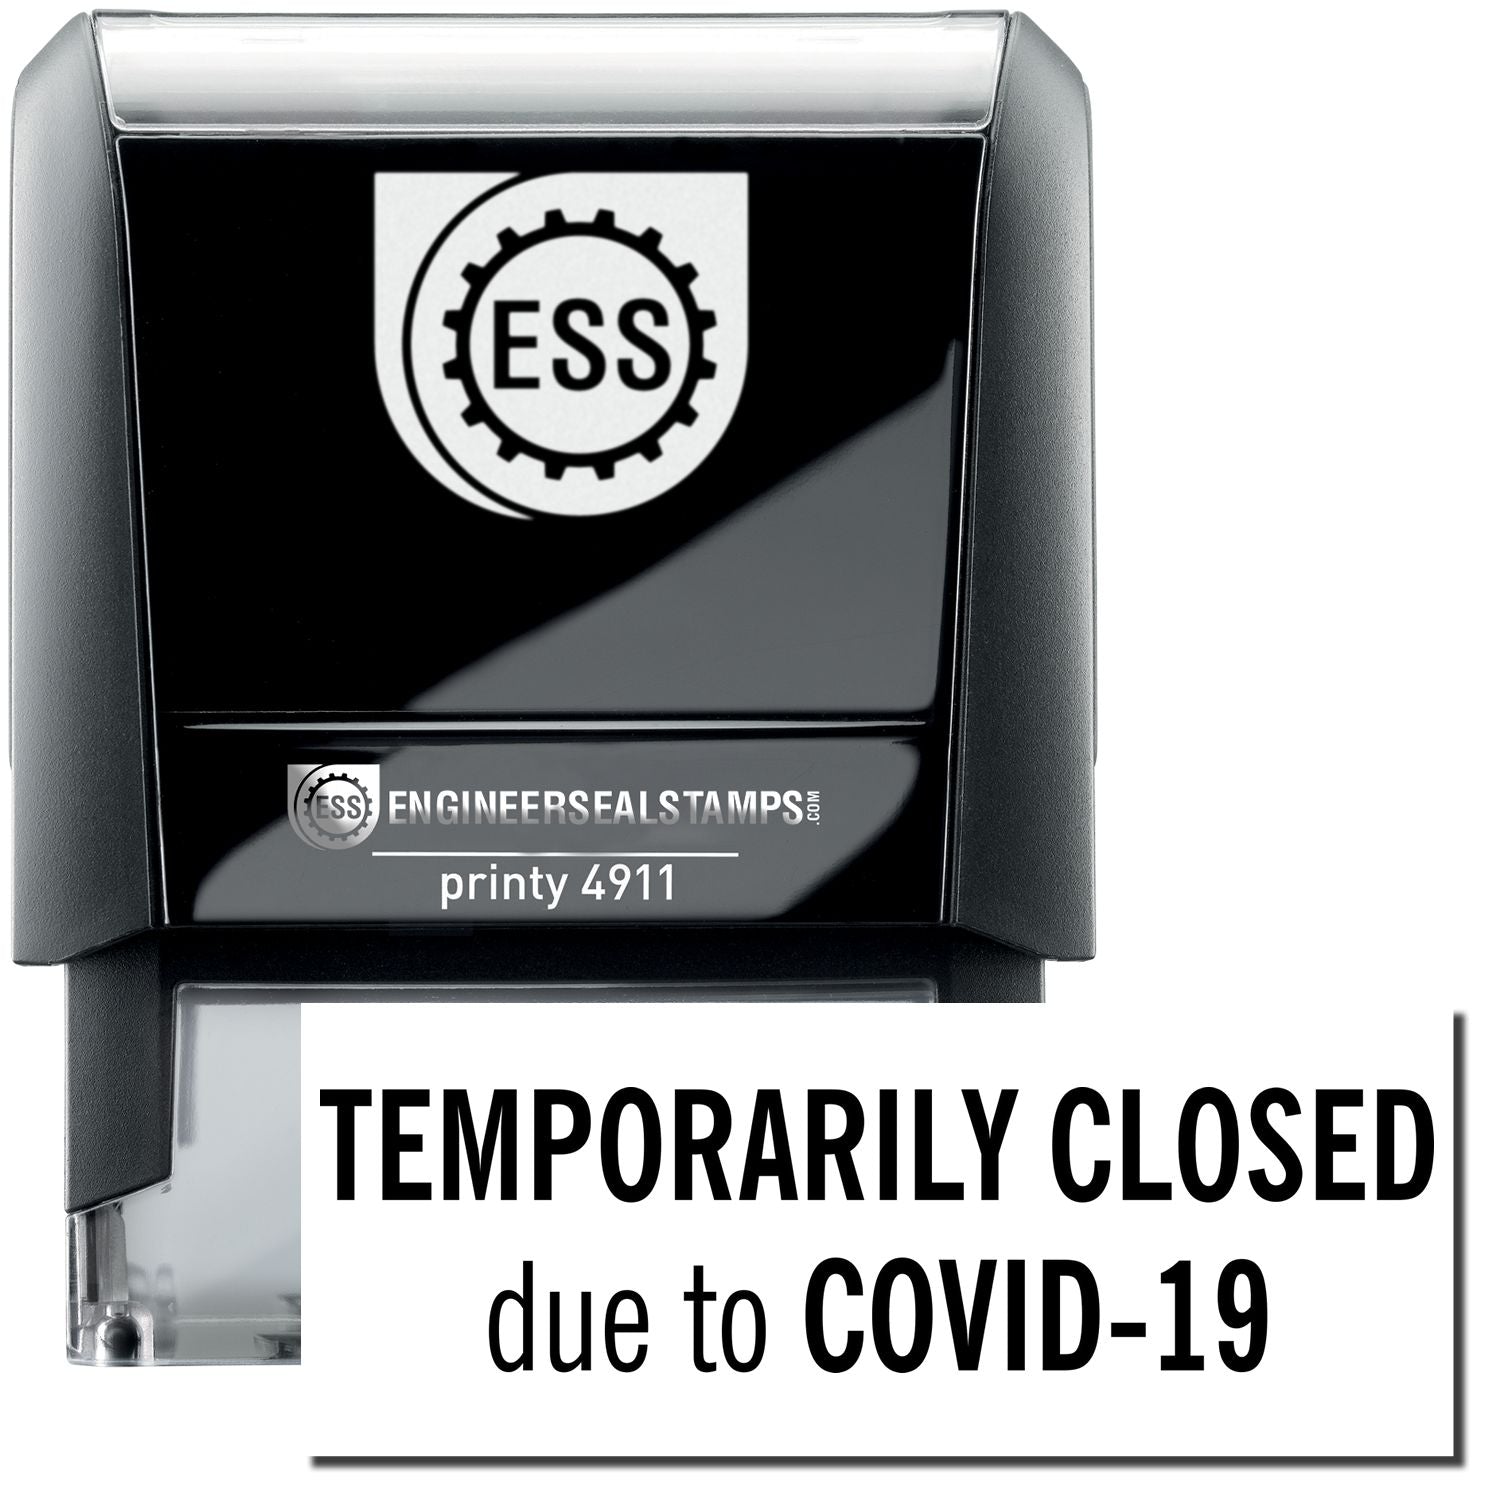 A self-inking stamp with a stamped image showing how the text "TEMPORARILY CLOSED due to COVID-19" is displayed after stamping.